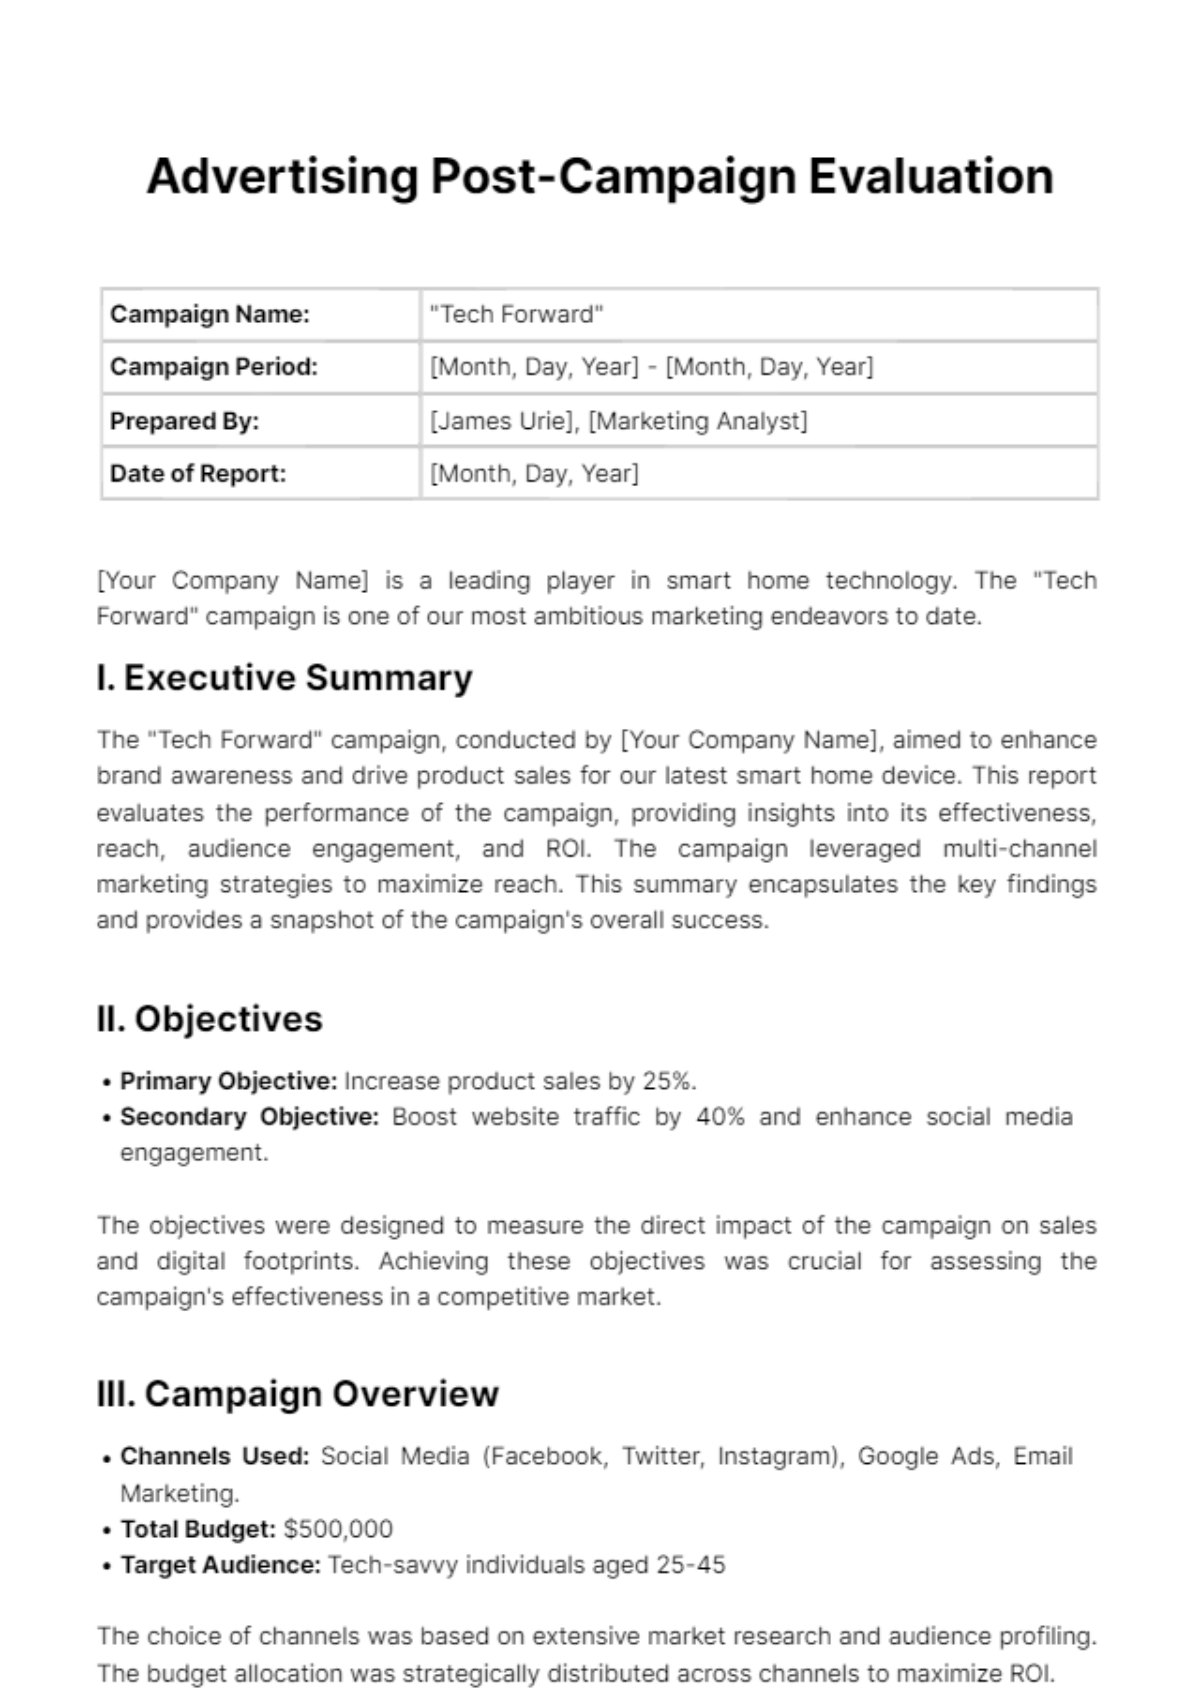 Free Advertising Post-Campaign Evaluation Template